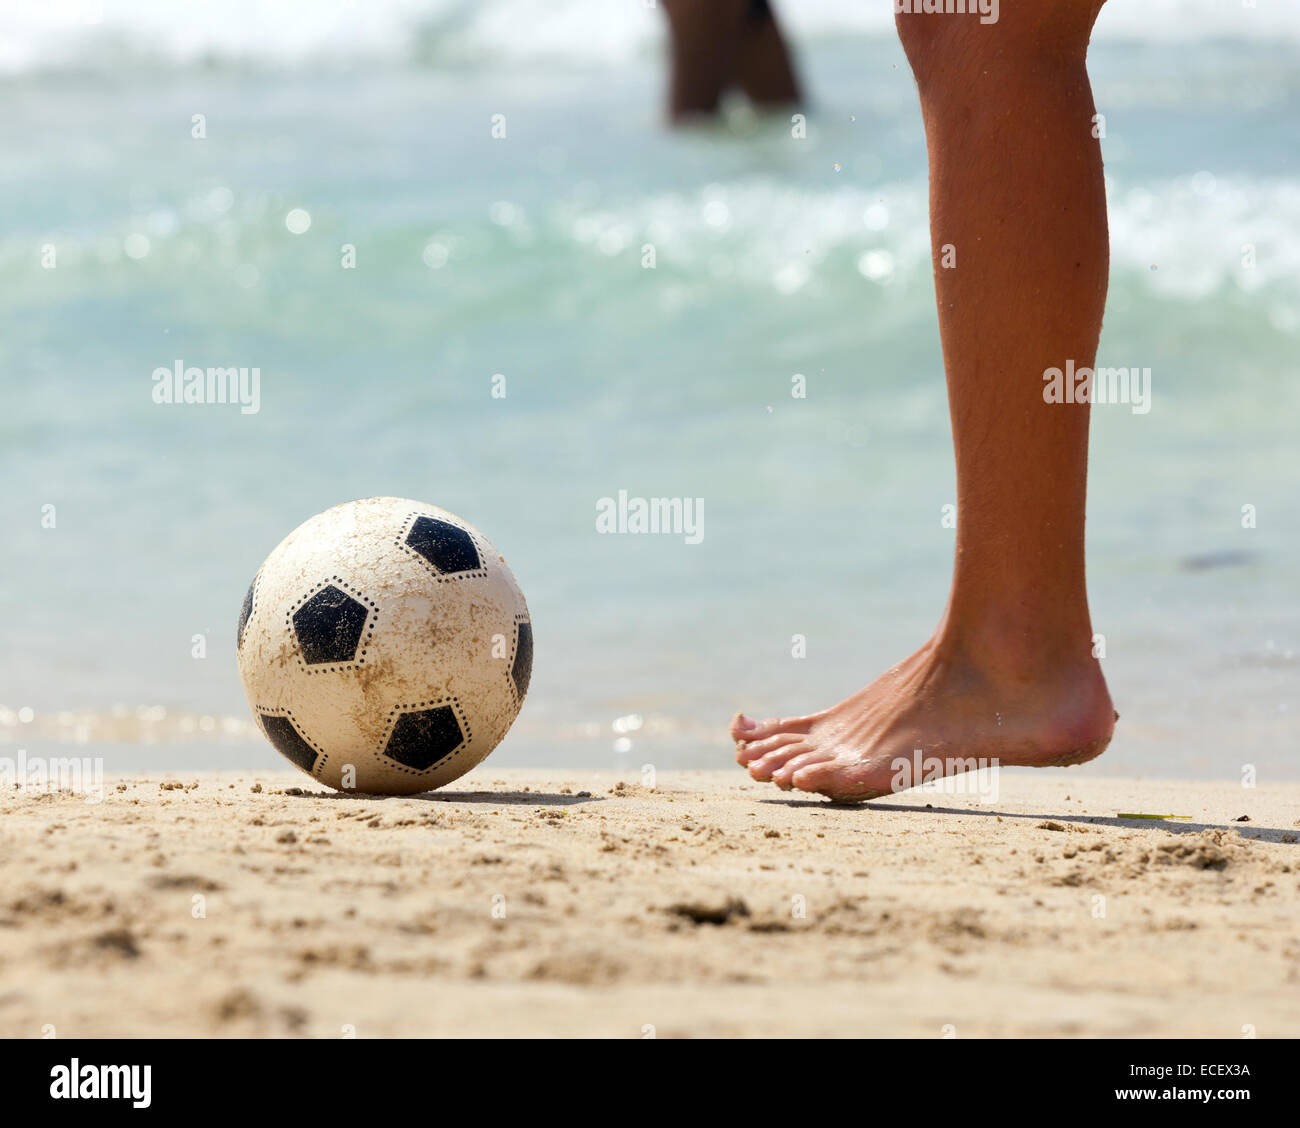 Close up of male foot playing football on sand. Stock Photo